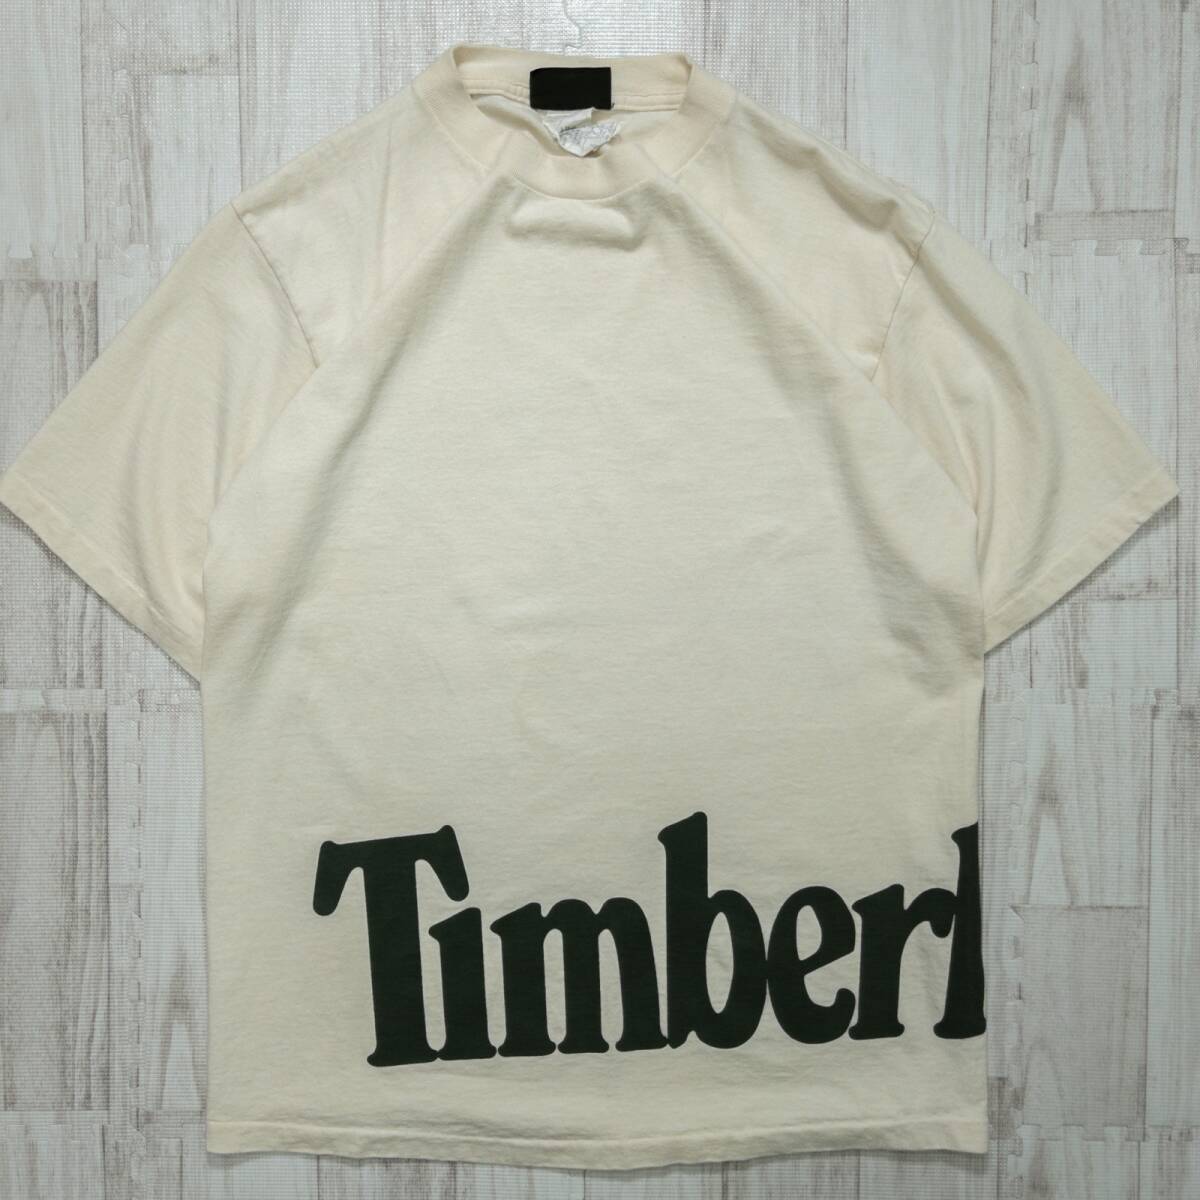  old clothes 90s Timberland Timberland large size Logo T-shirt tops men's M corresponding usa made beige ivory single stitch 